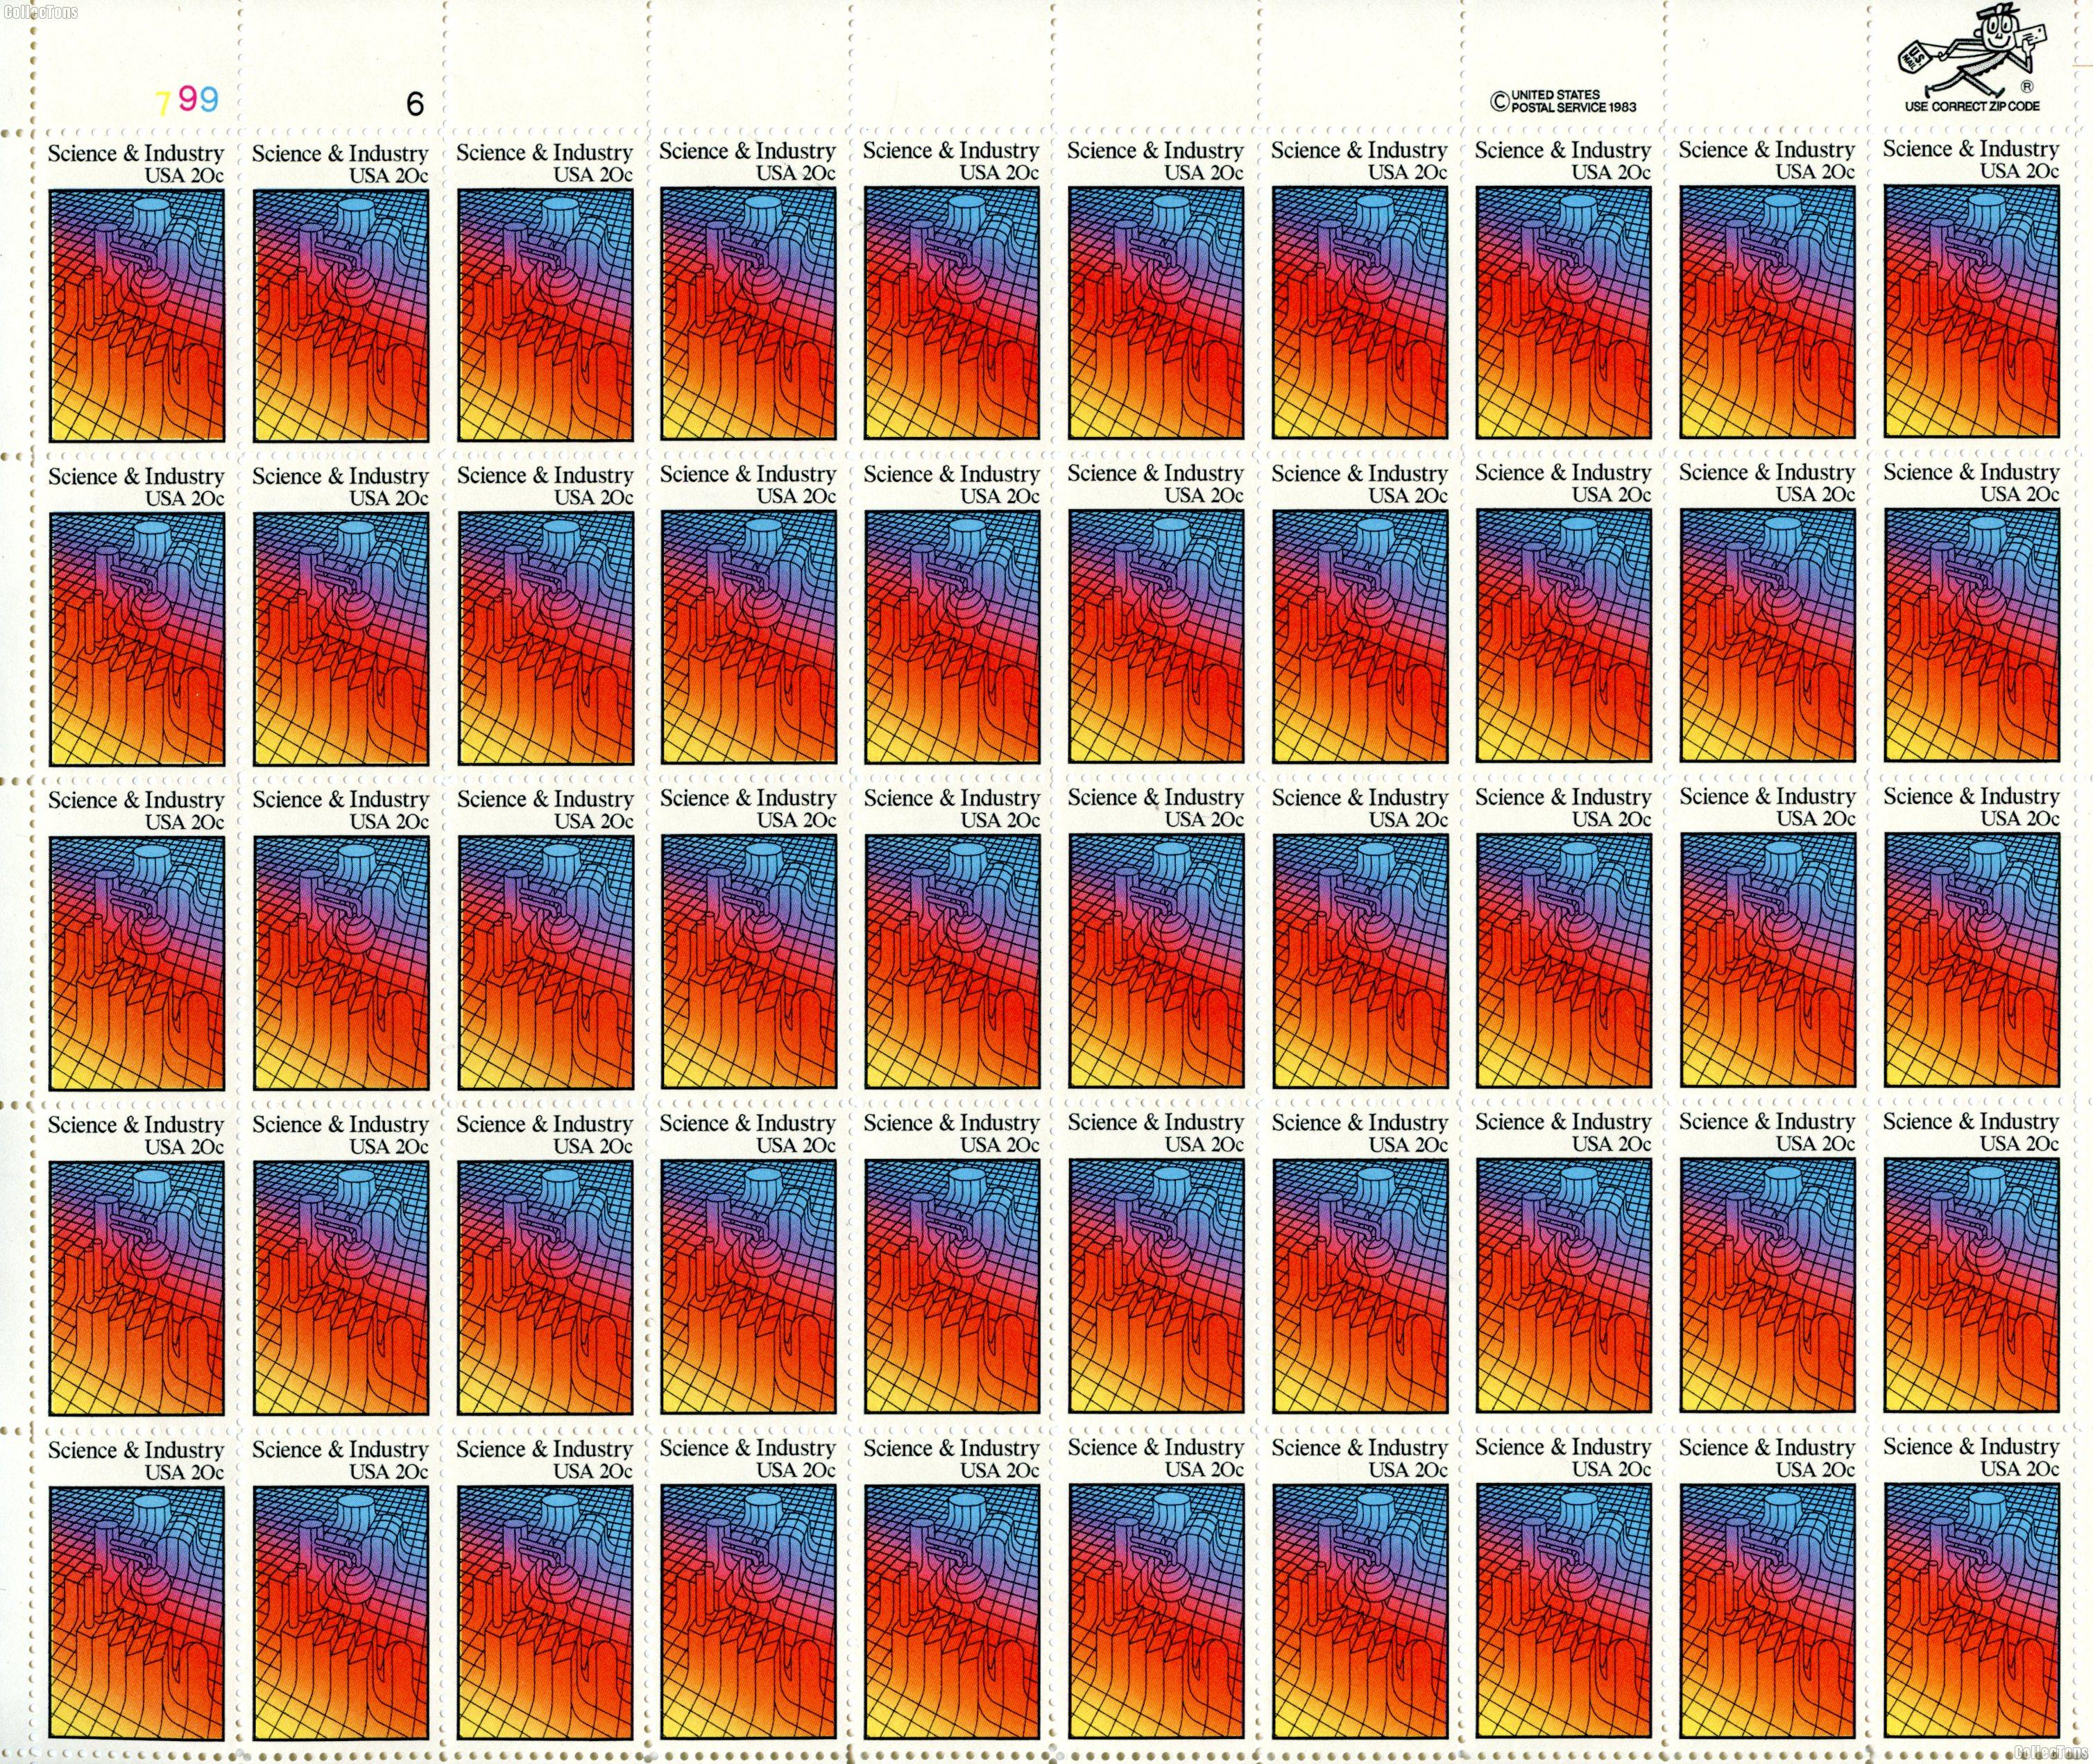 1983 Science & Industry 20 Cent US Postage Stamp MNH Sheet of 50 Scott #2031